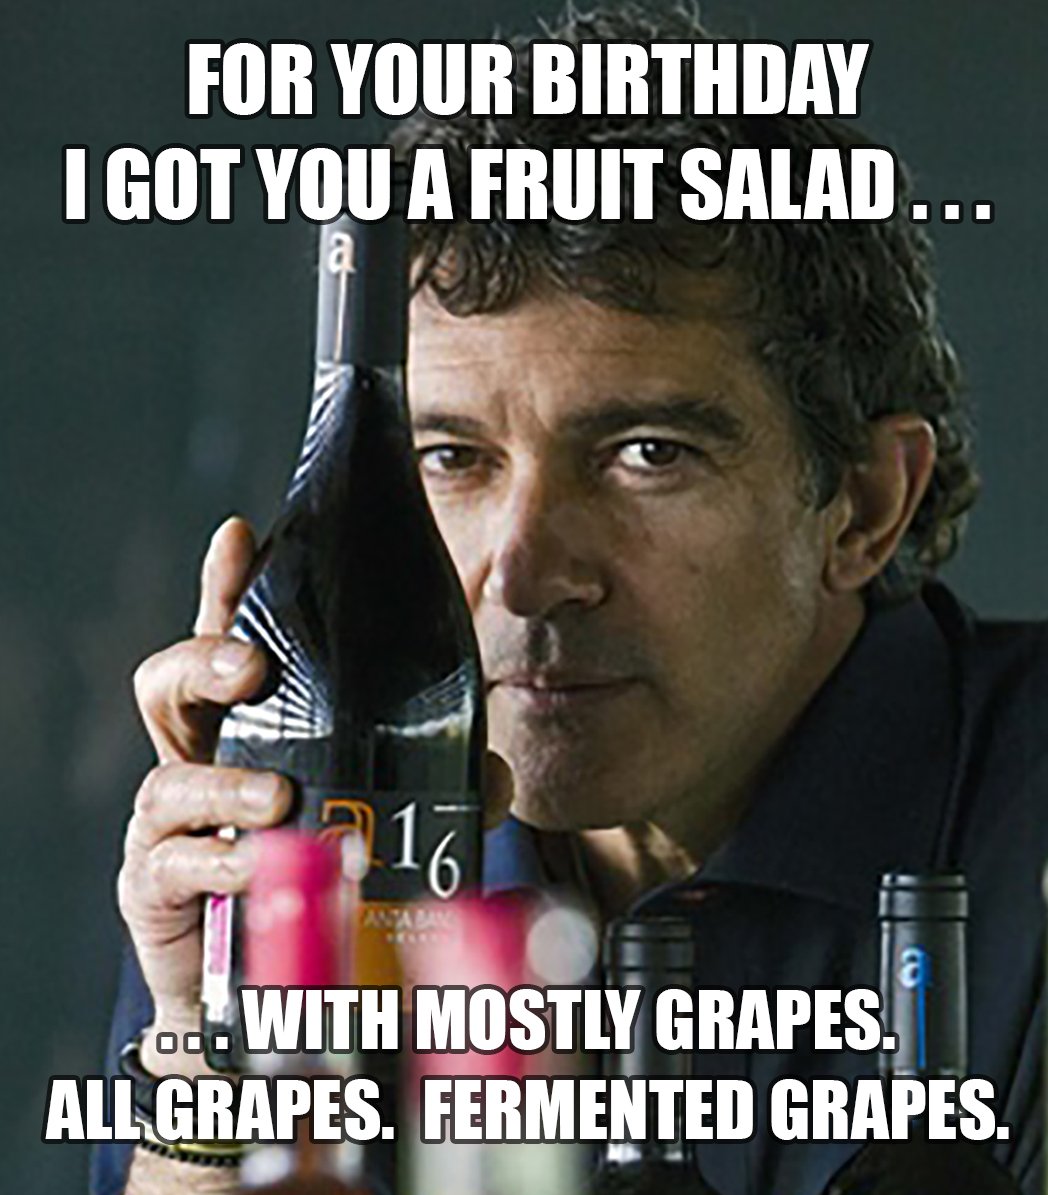 Wine label meme for celebrating a birthday that says: For your birthday I got you a fruit salad..with mostly grapes. All grapes. Fermented grapes.